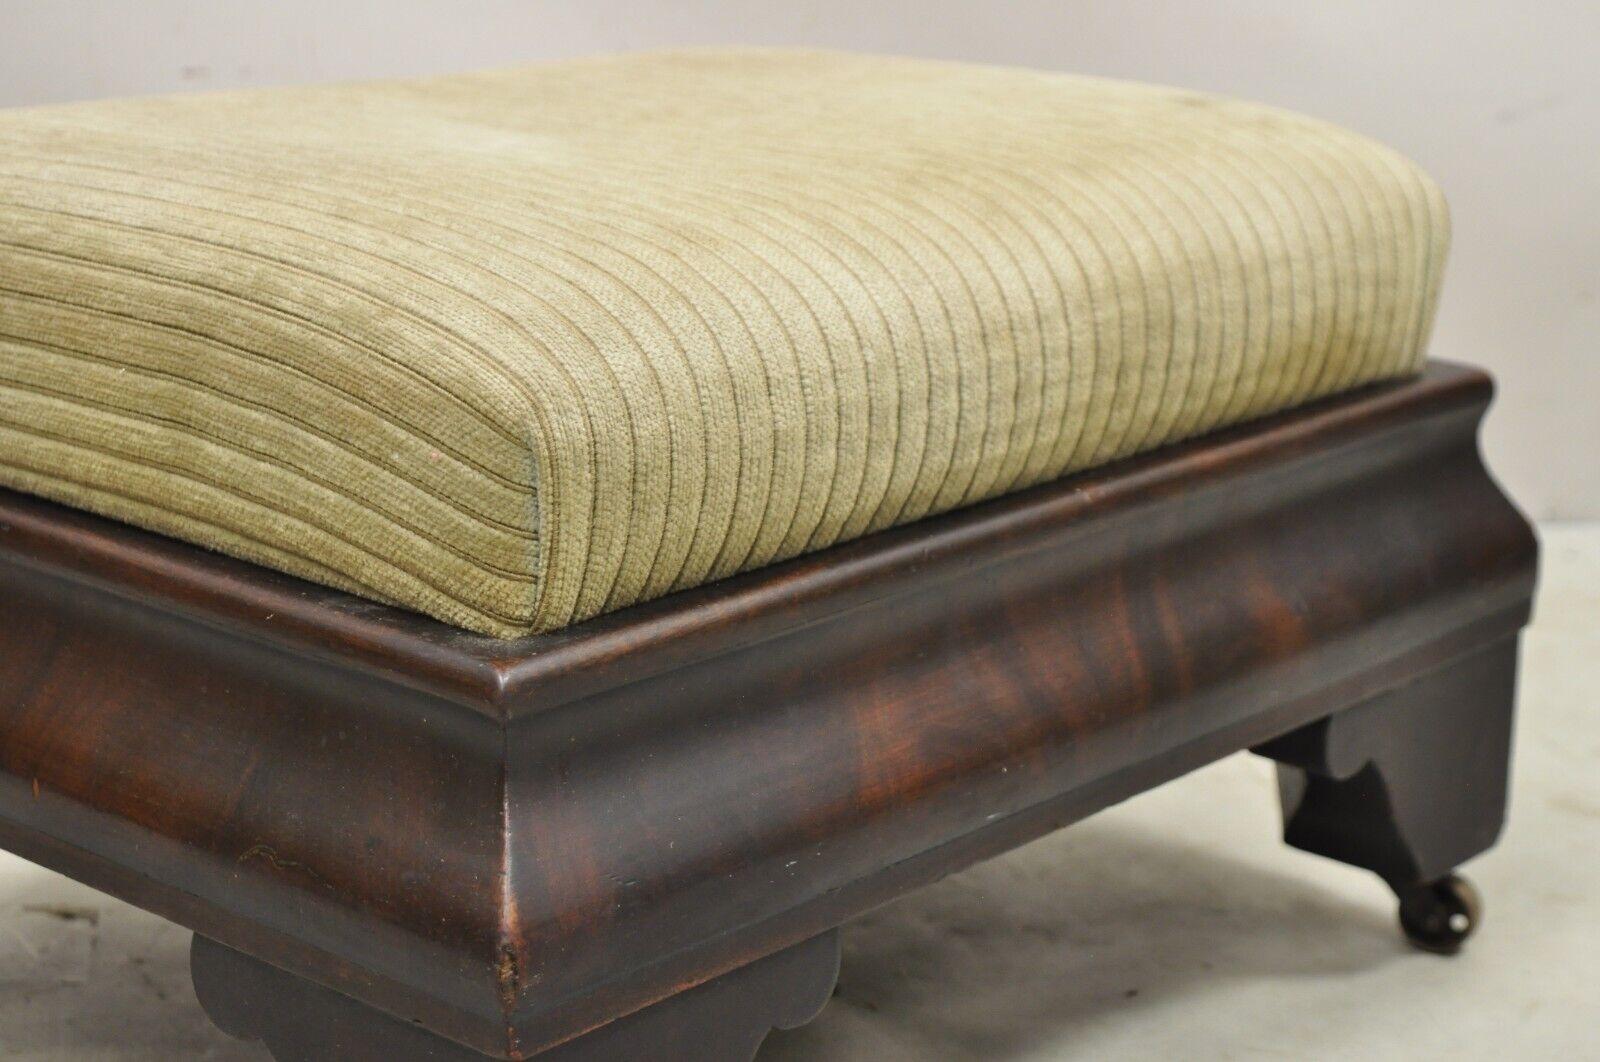 Antique American Empire Flame Mahogany Upholstered Ottoman Footstool on Wheels 2